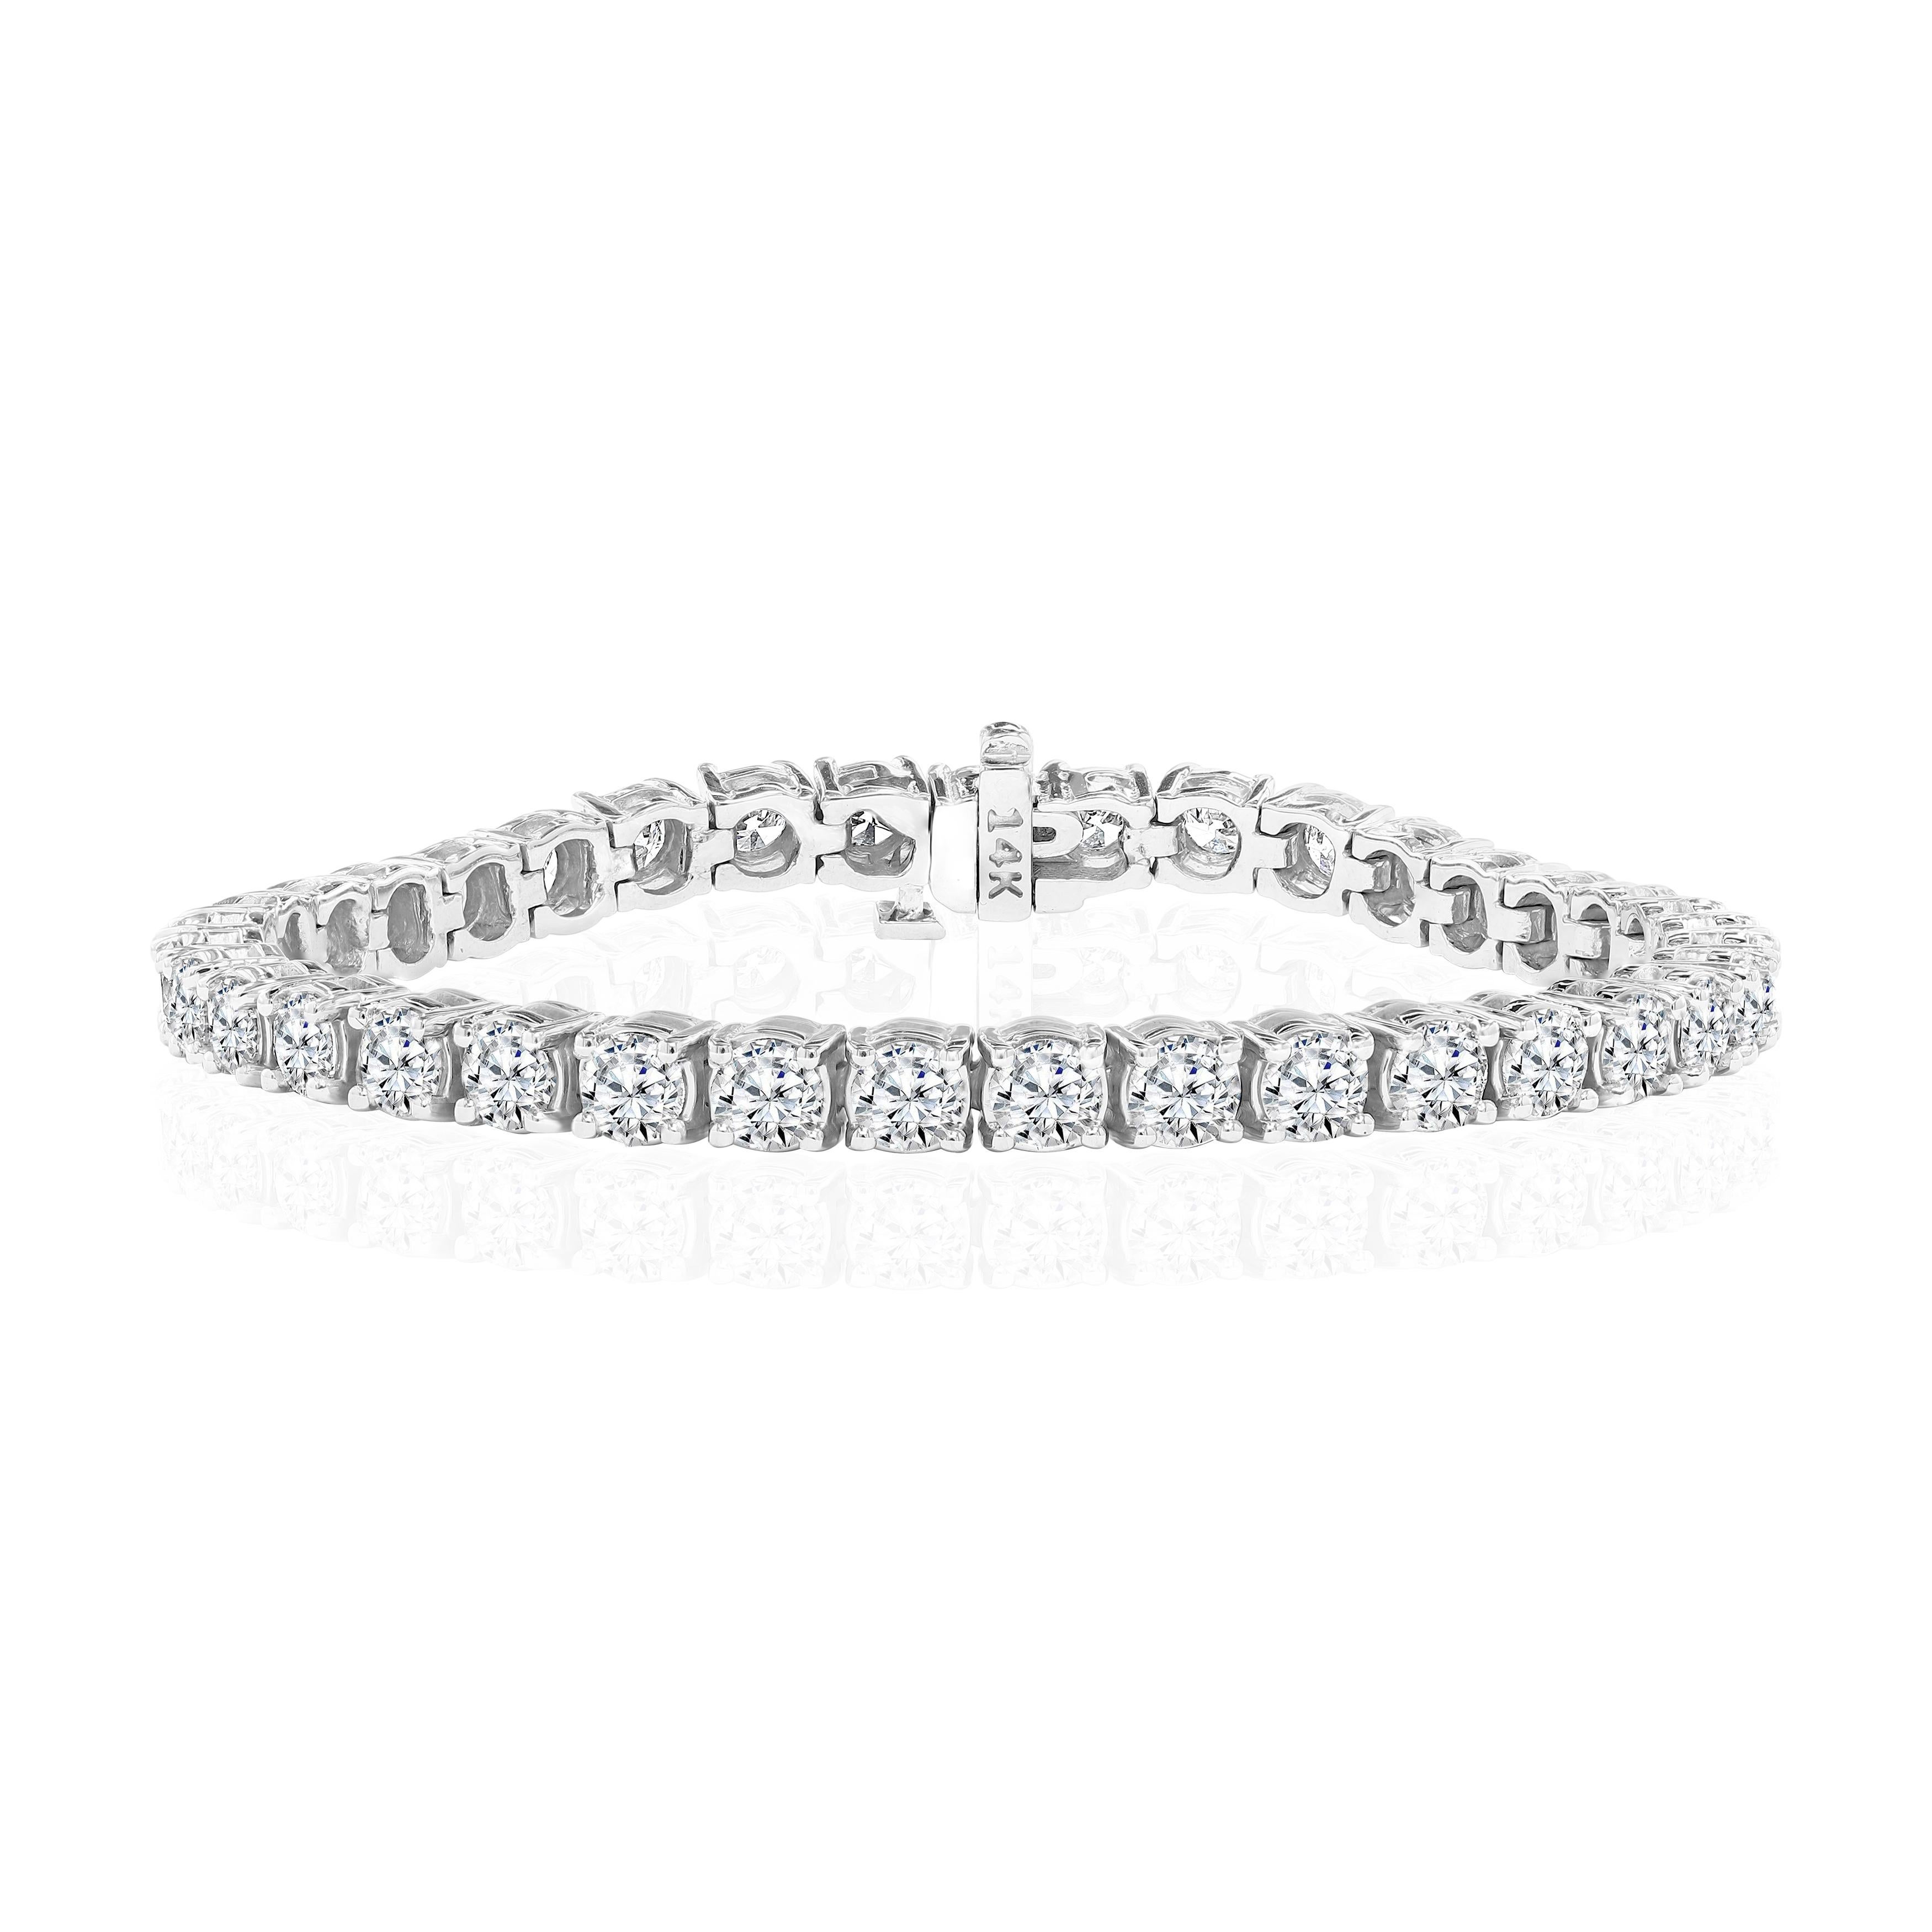 36 Round Brilliant Diamonds weighing 10.90 Carats and set in 14 Karat White Gold.

Diamonds are of H-I color and SI clarity.

Measures 6.75 inches.